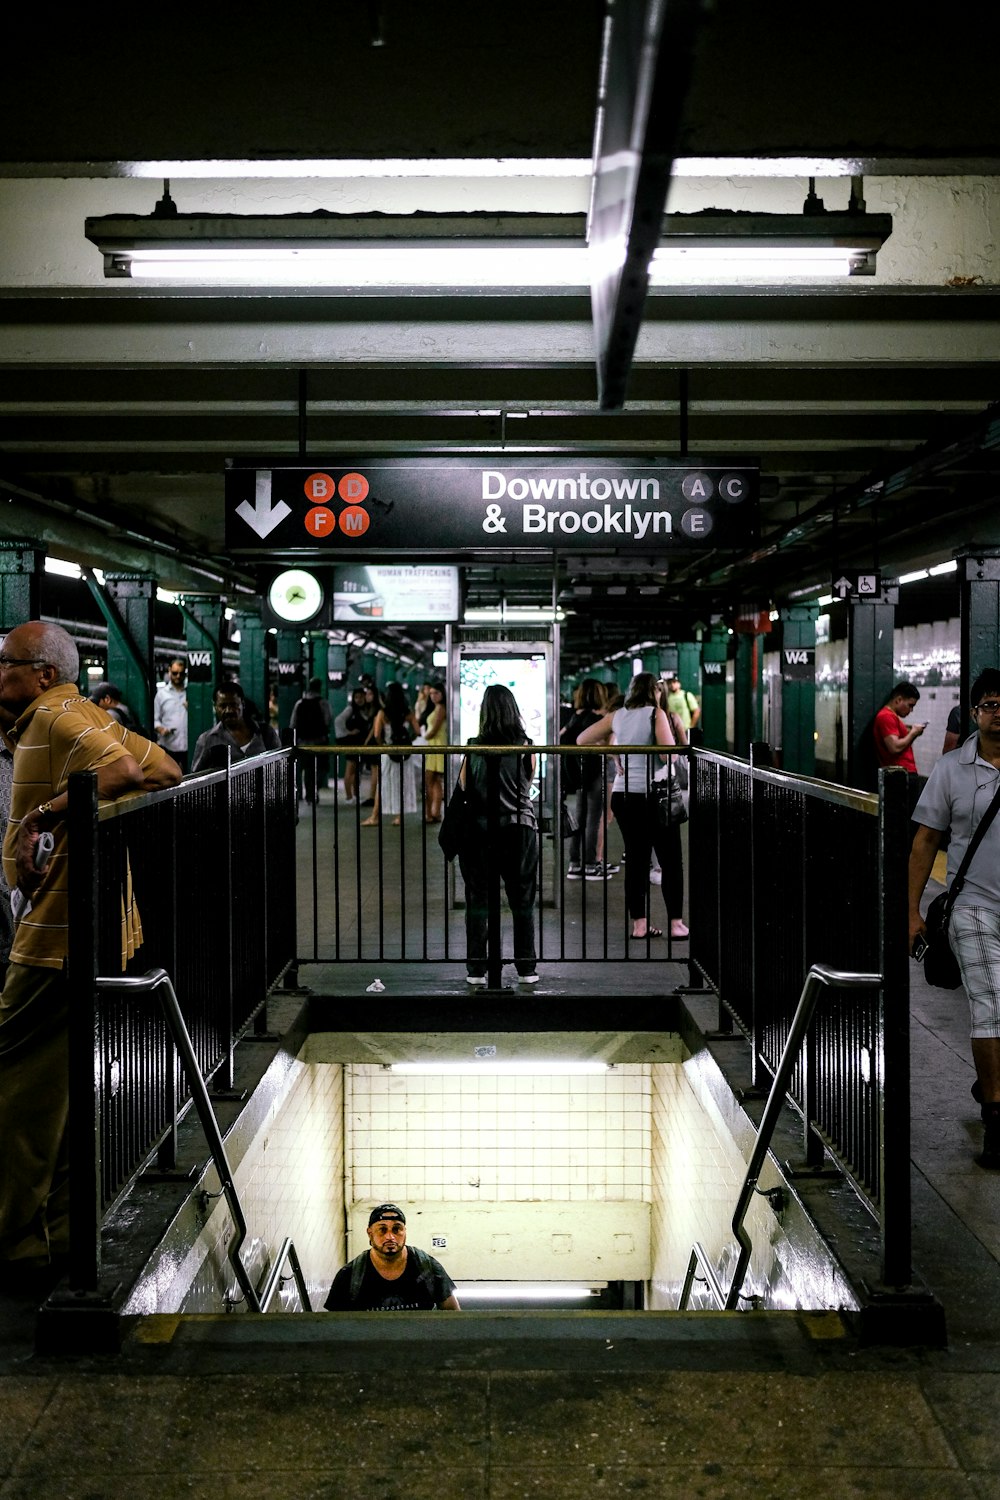 follow News Without Politics, New York City subway opens-today in history, subscribe to News Without Politics, top news other than politics, 